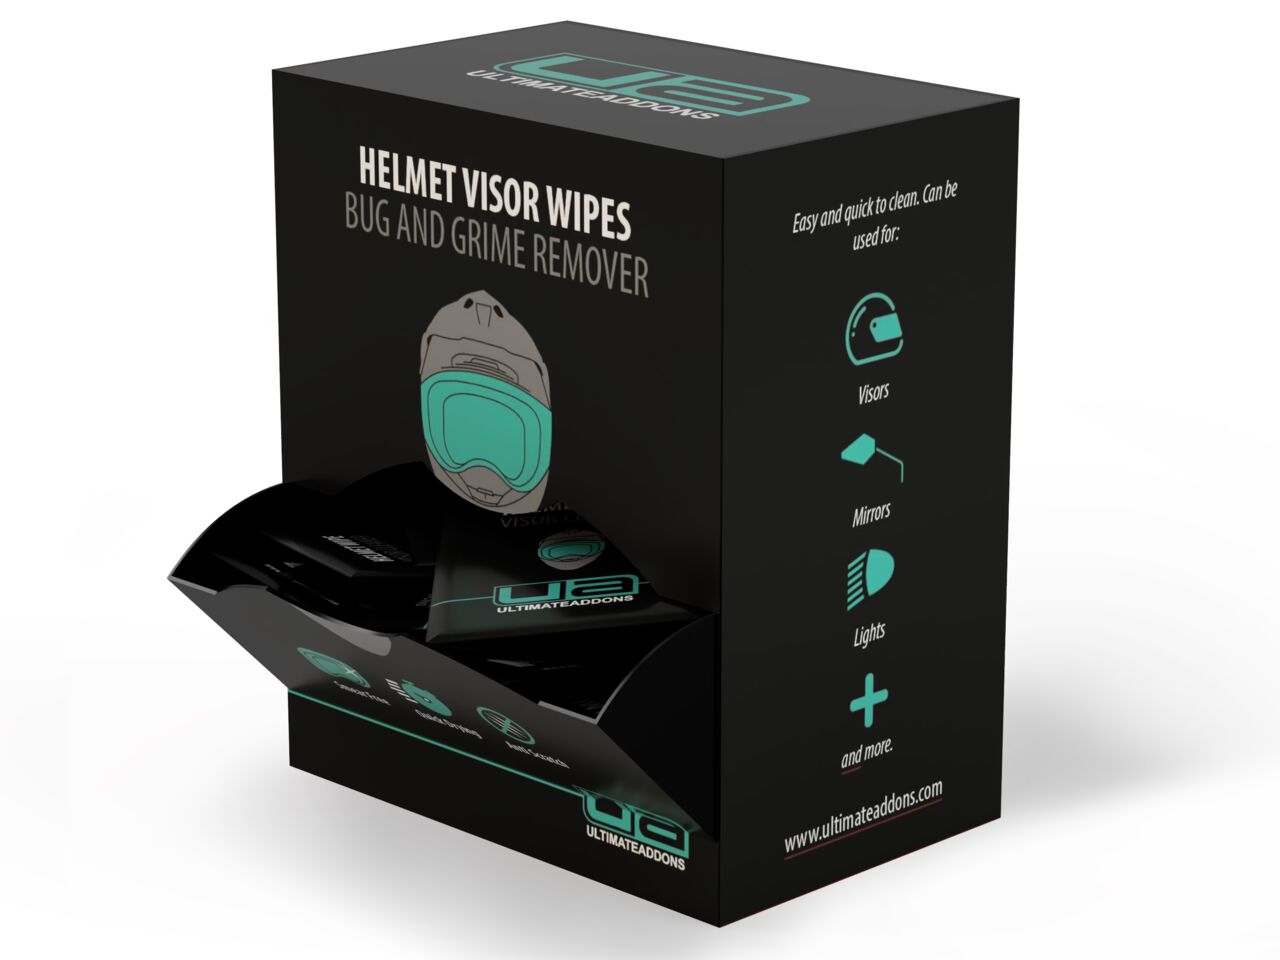 Motorcycle visor wipes, anti strach wipes ideal for removing flys, midgies from your visor